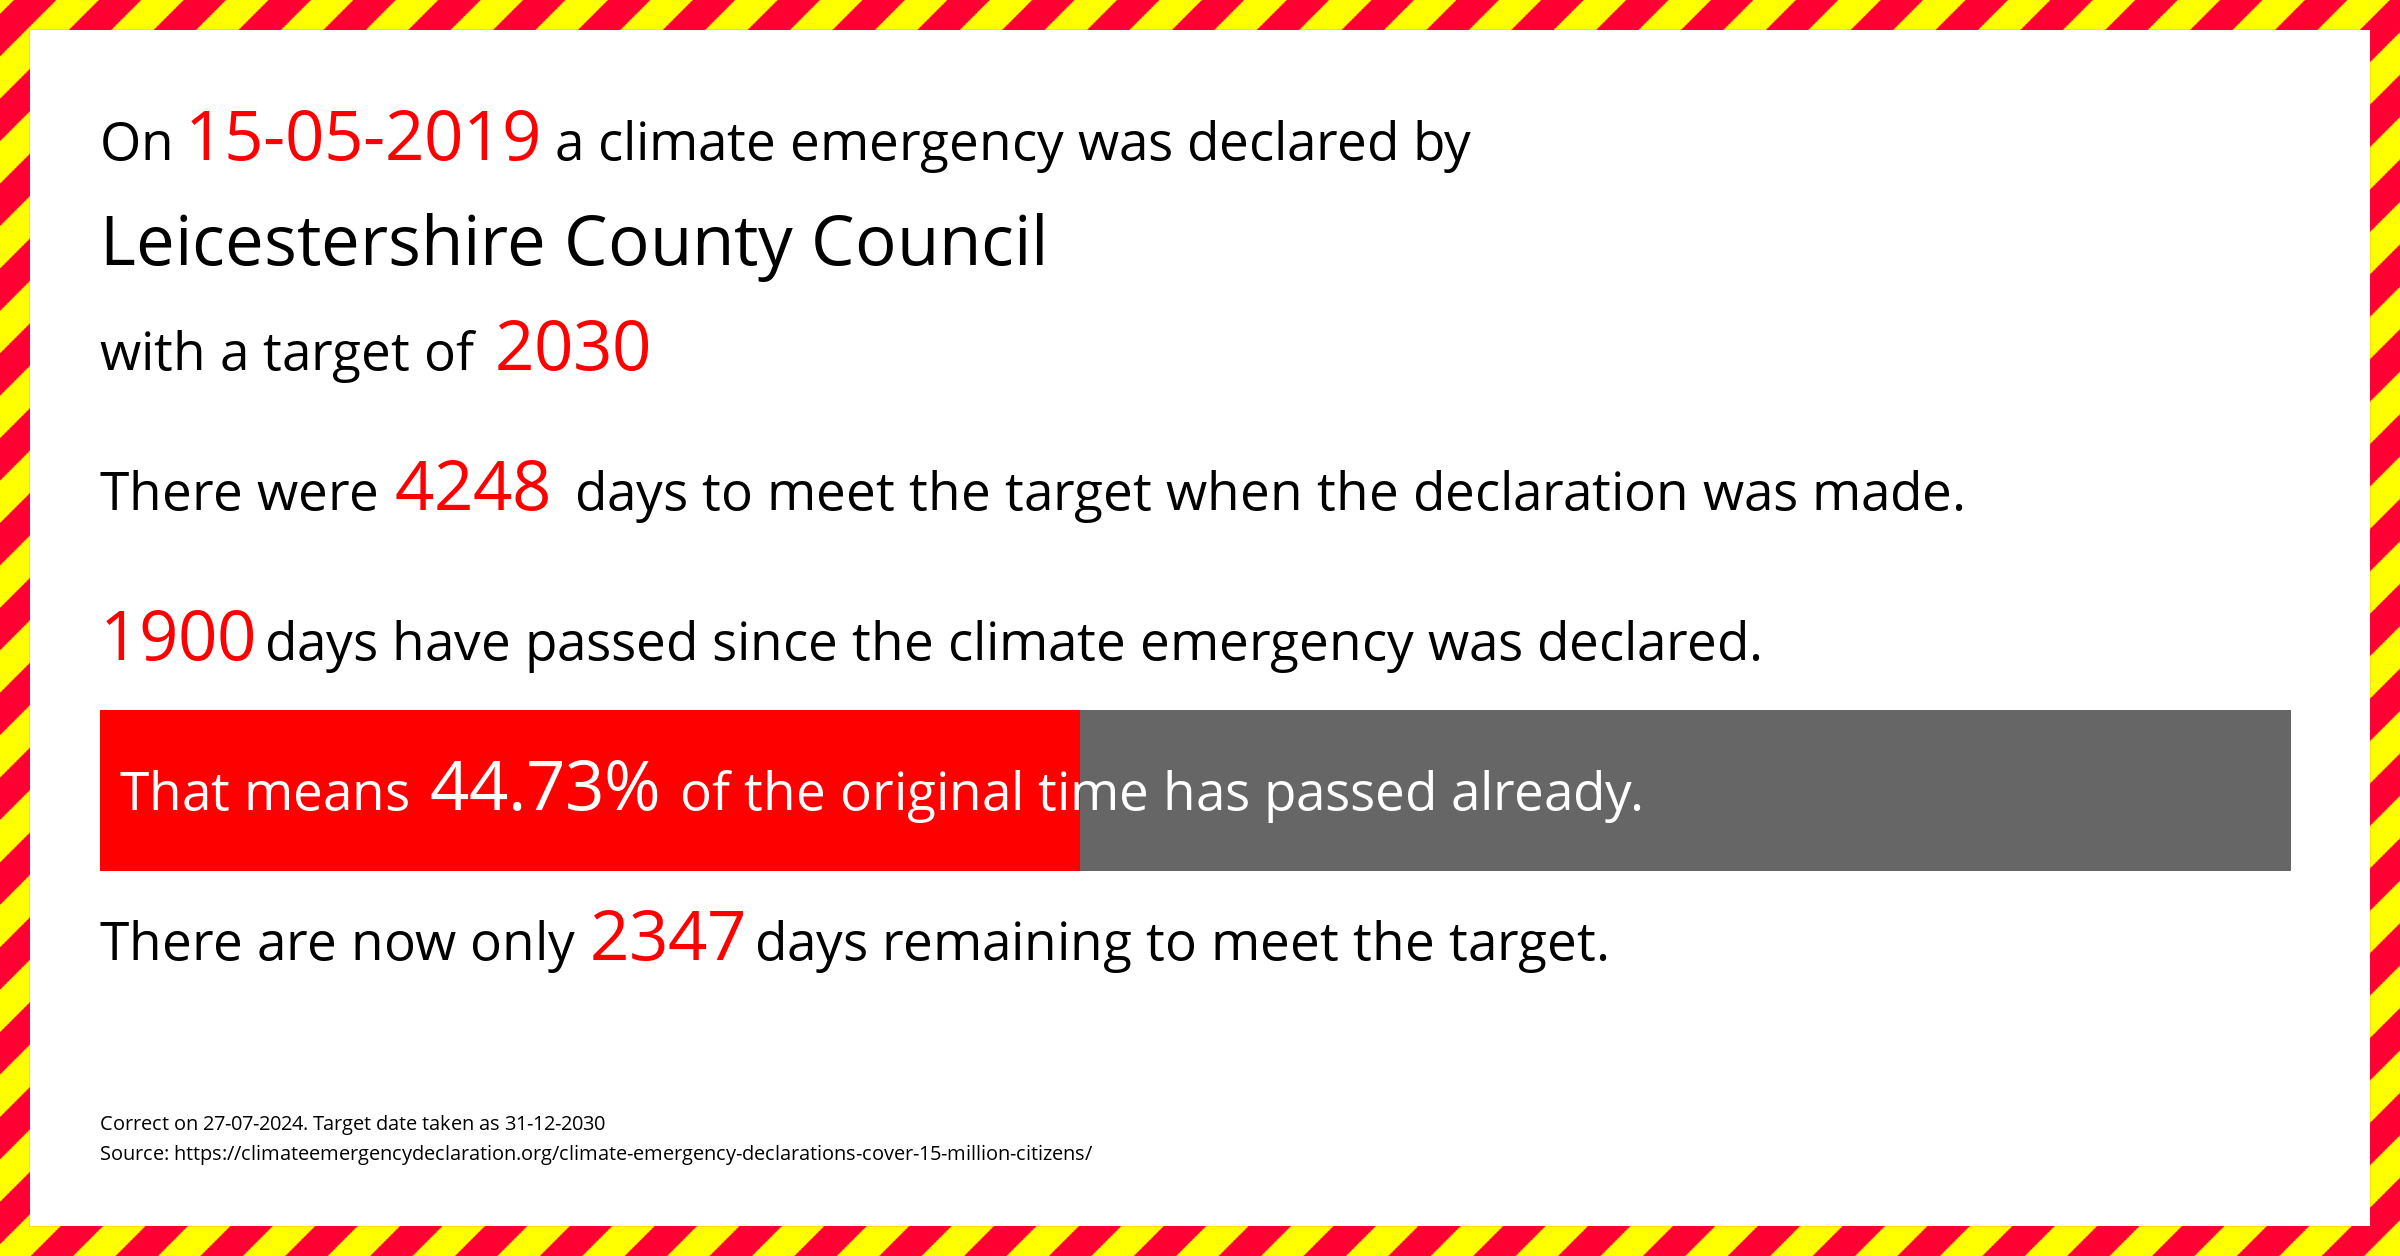 Leicestershire County Council declared a Climate emergency on Wednesday 15th May 2019, with a target of 2030.